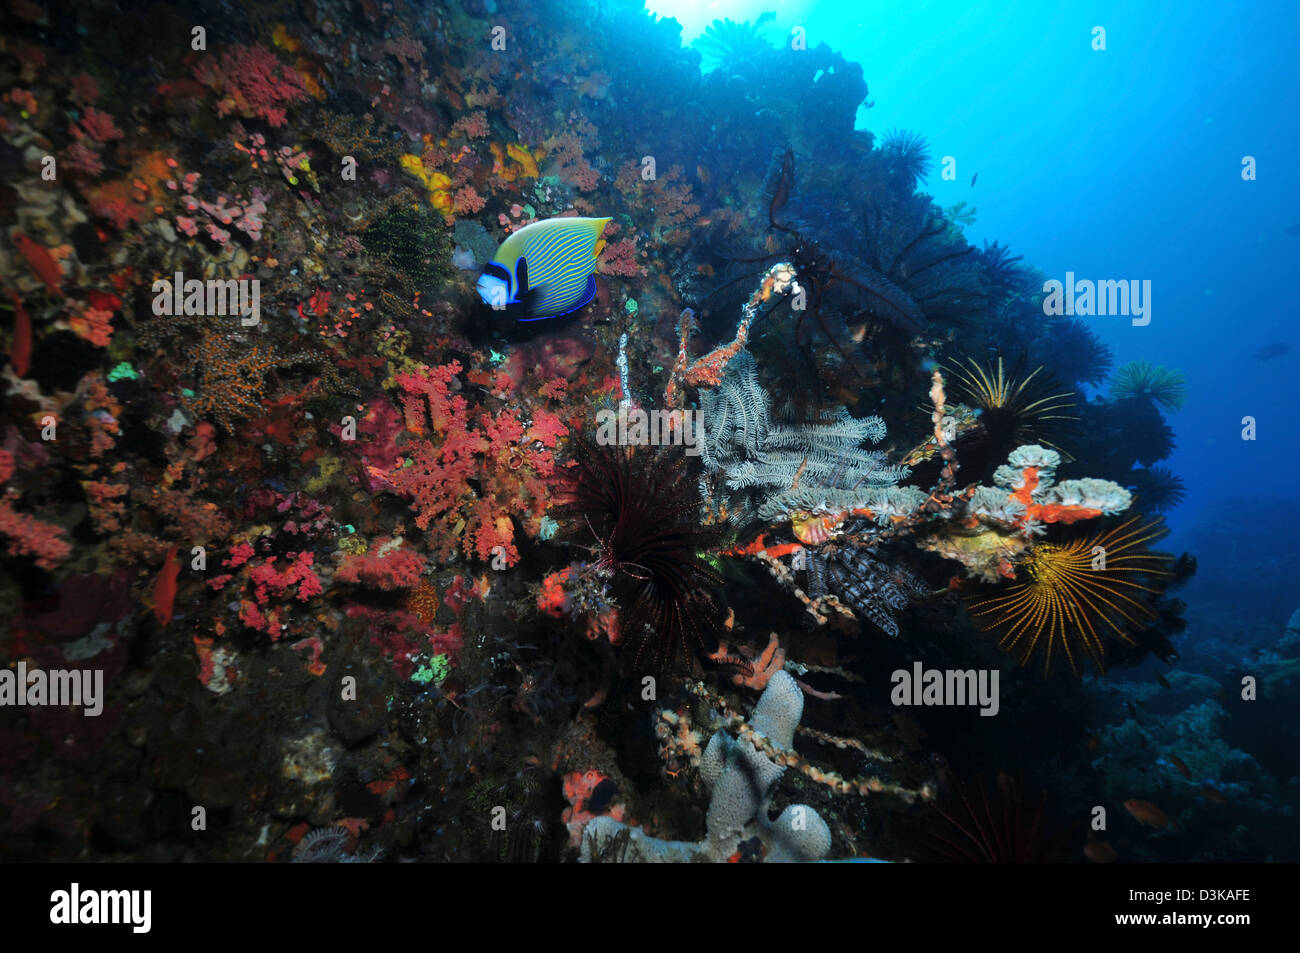 Colorful underwater wall with red soft coral, grey sponges and emperor angelfish, Komodo, Indonesia. Stock Photo